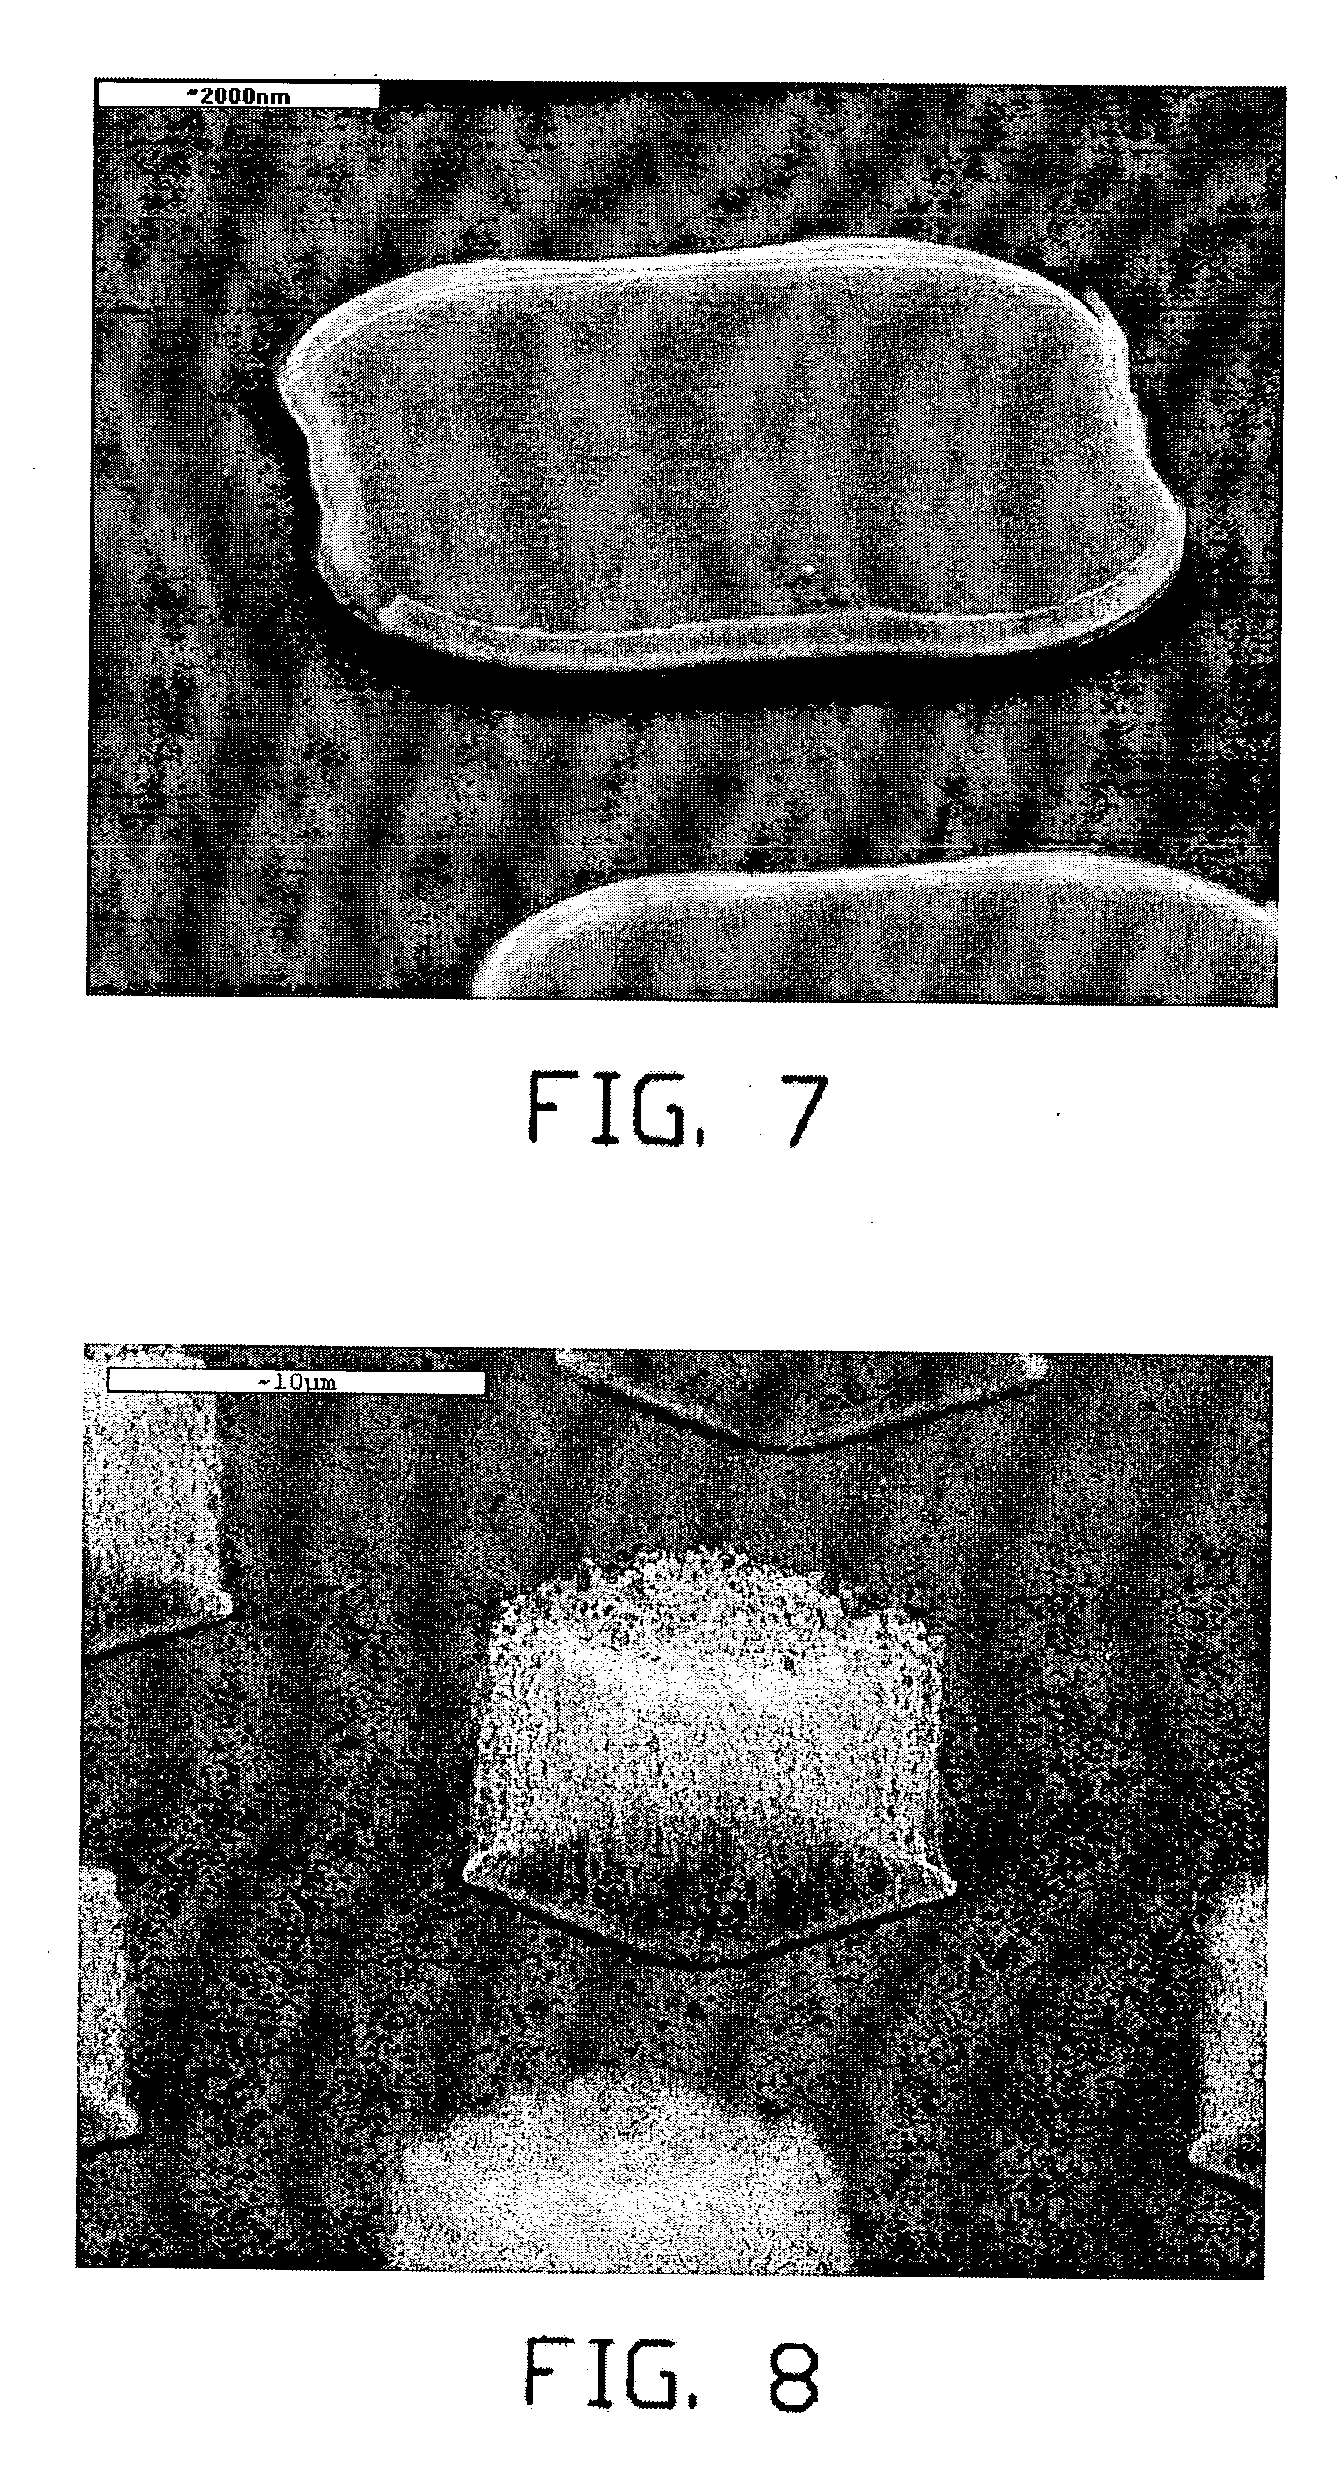 Carbon nanotube array and method for forming same